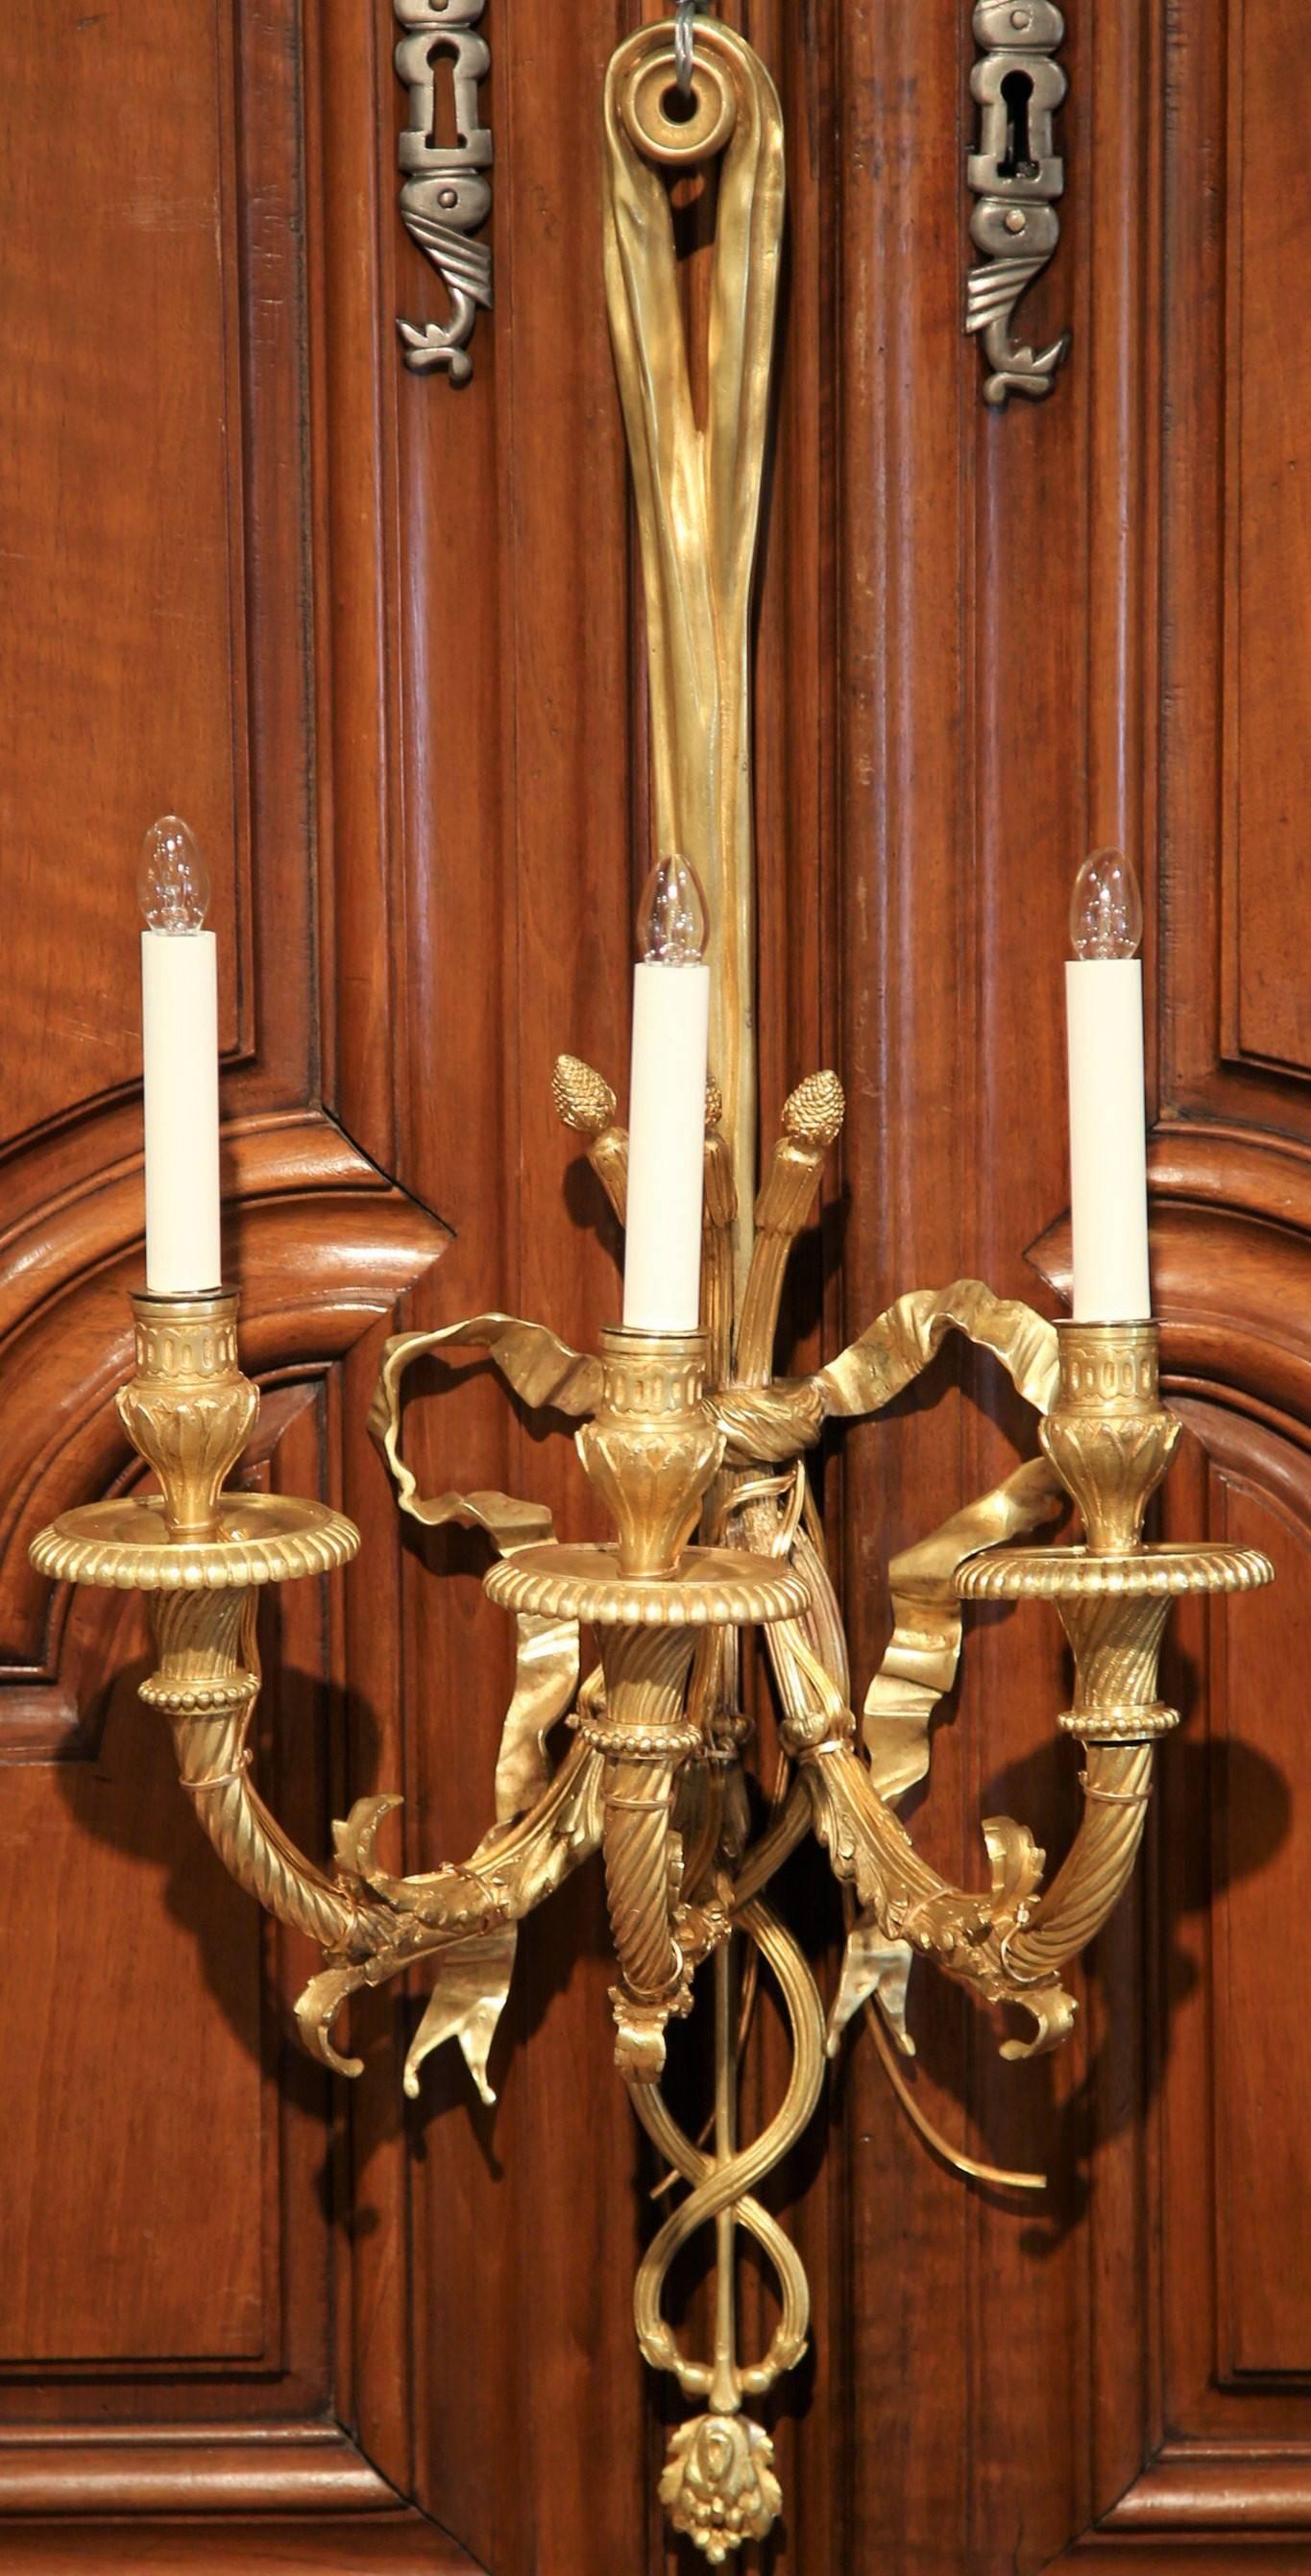 This pair of elegant bronze sconces was created in France, circa 1870. The large wall lights have three twisted arms newly wired and feature the traditional Louis XVI ribbon bow embellished with intricate scroll work on the bottom. The fixtures are